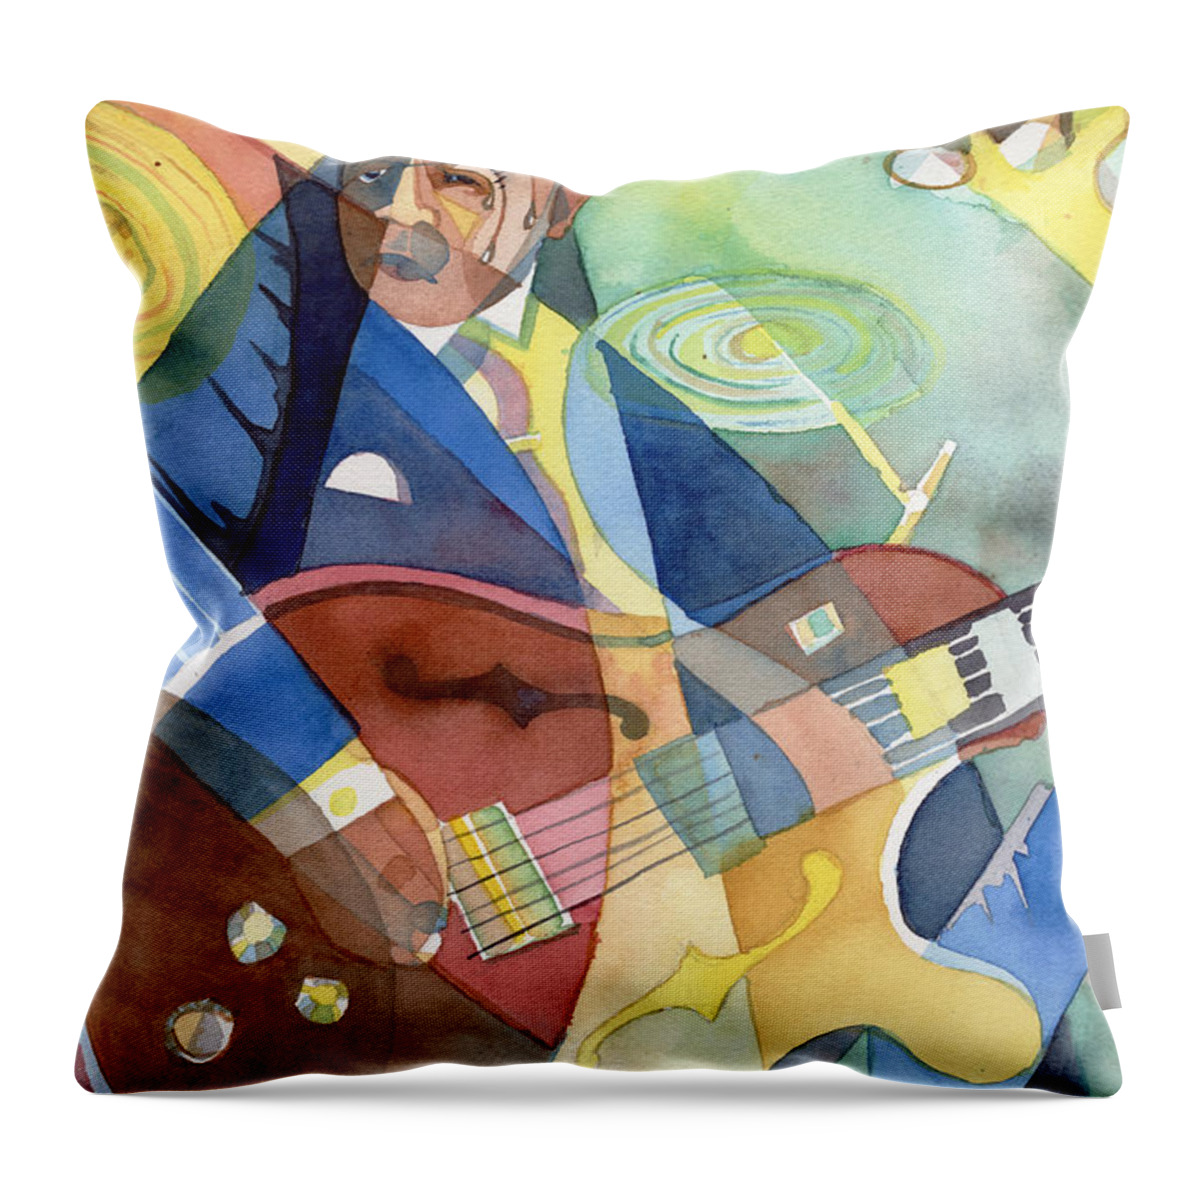 Music Throw Pillow featuring the painting Jazz Guitarist by David Ralph